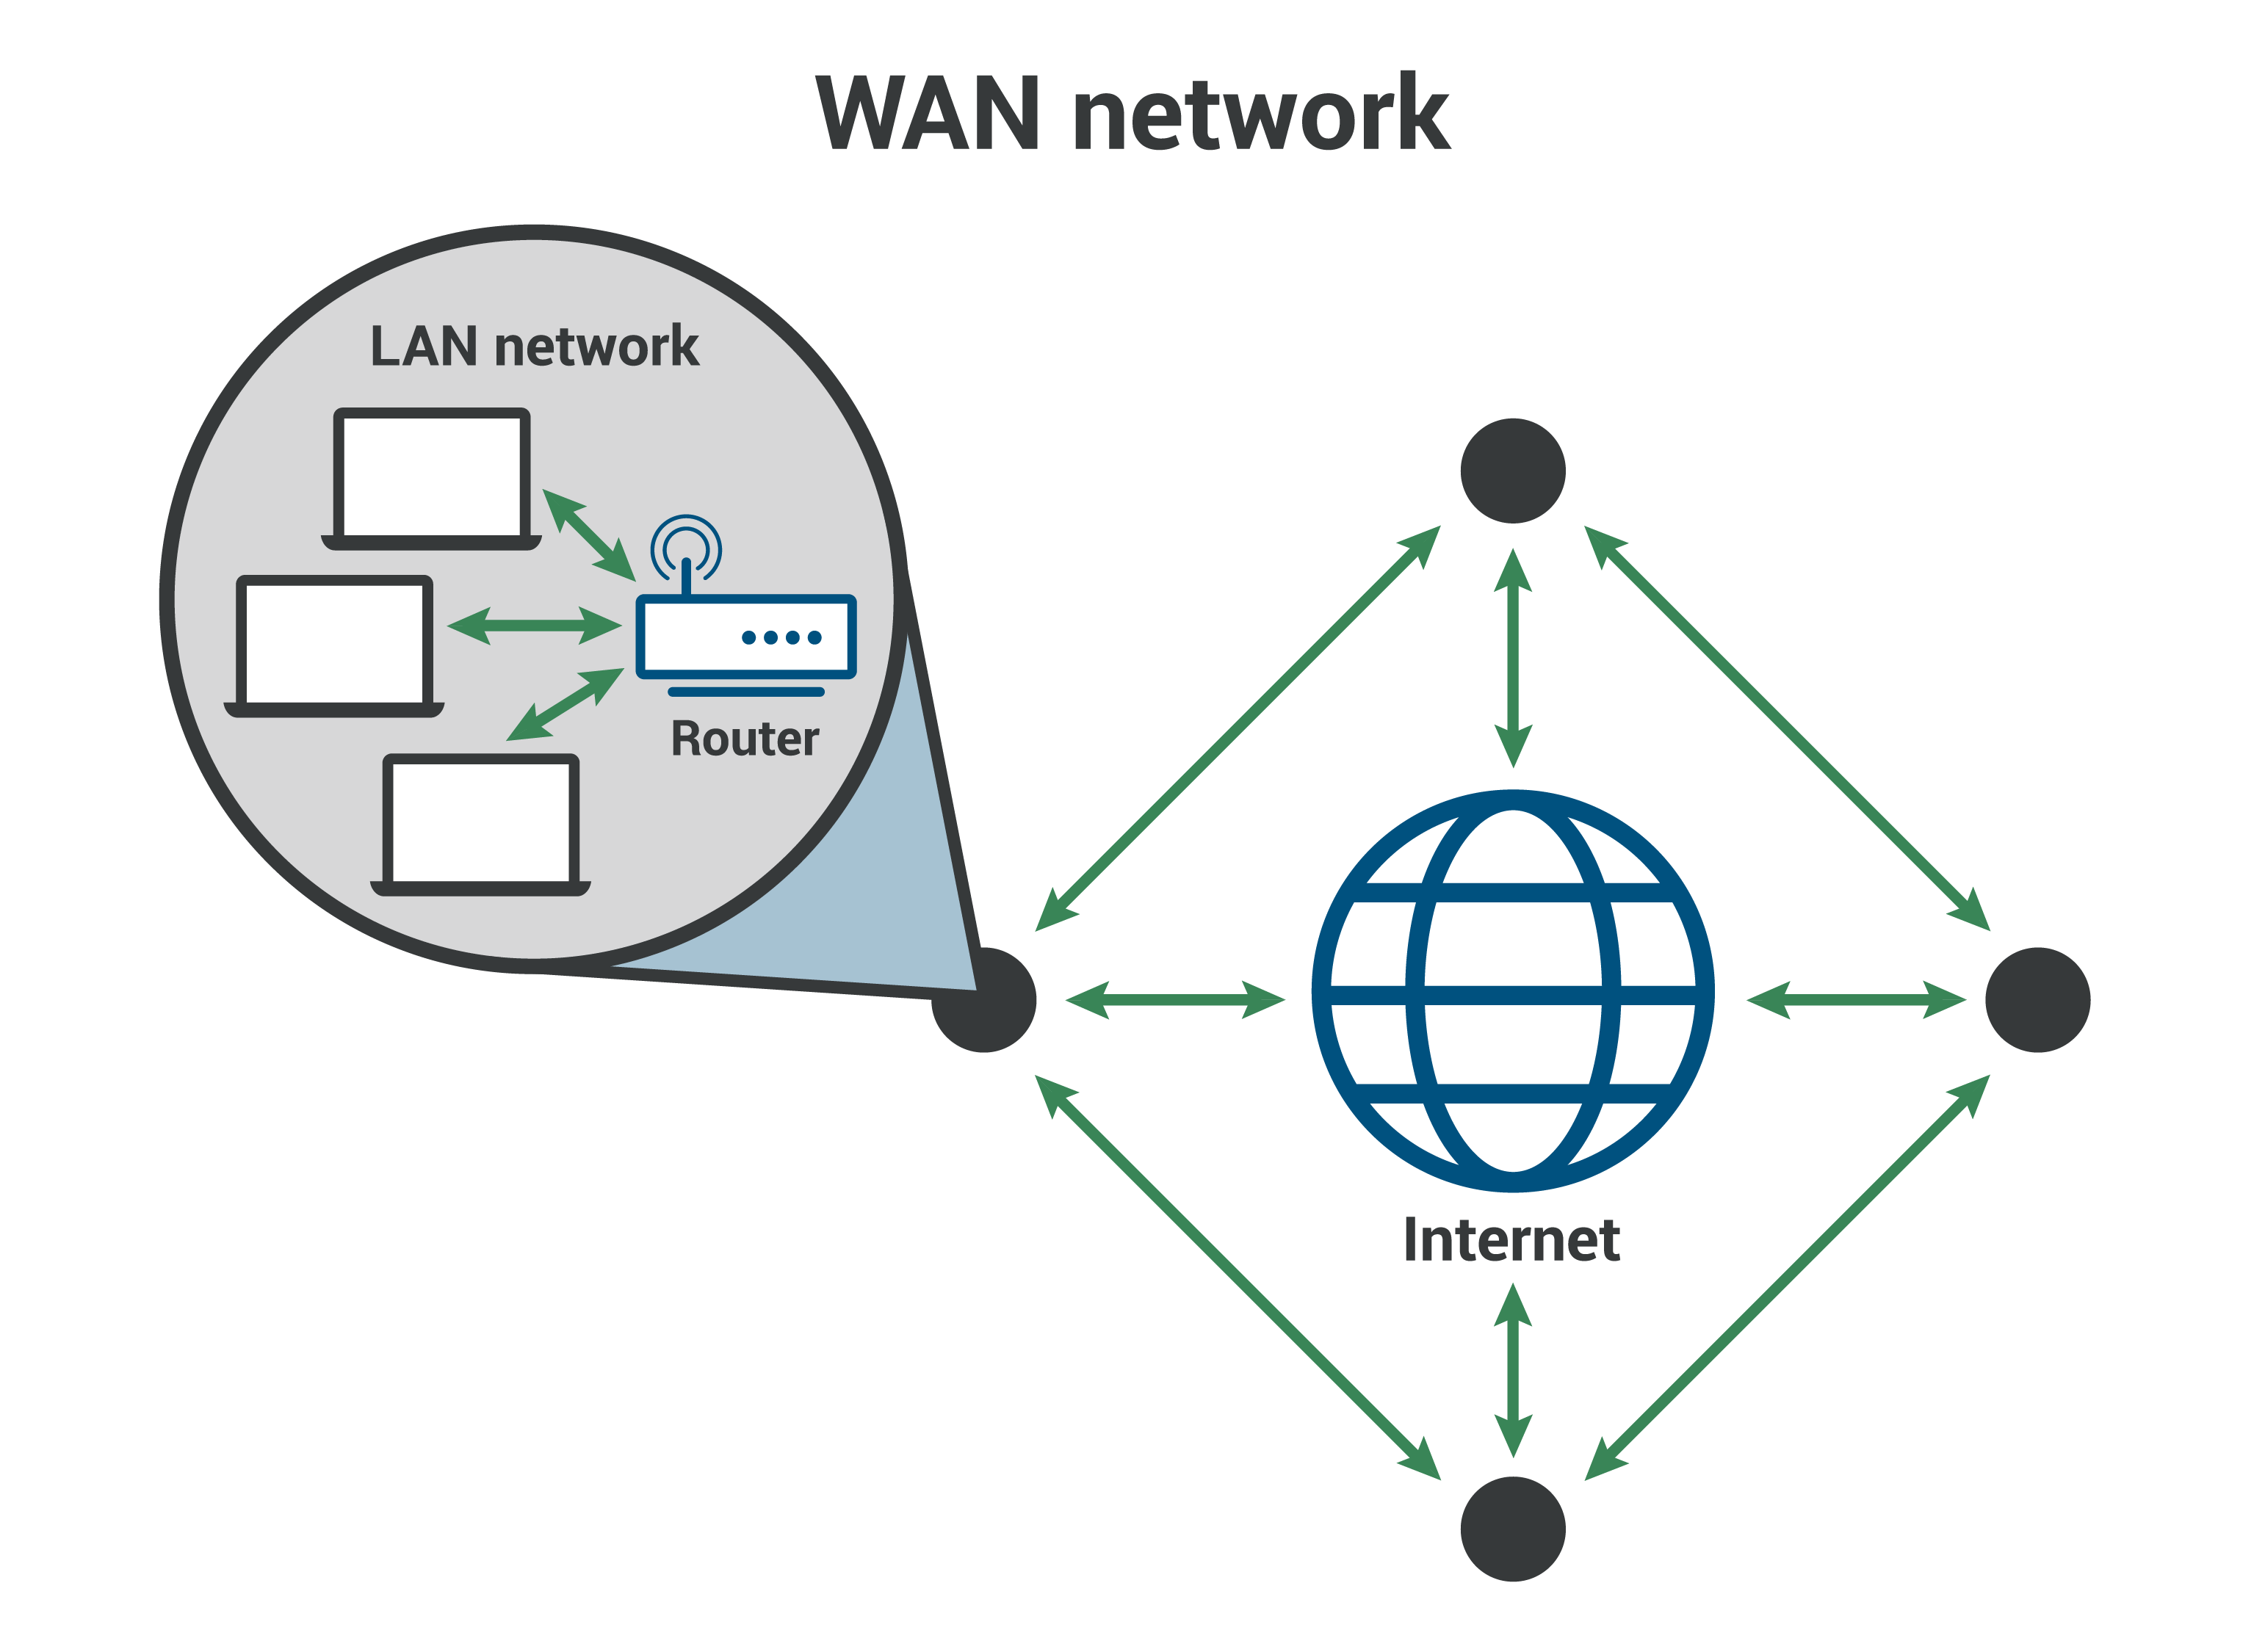 Wide area network WAN - Multiple LANs connected